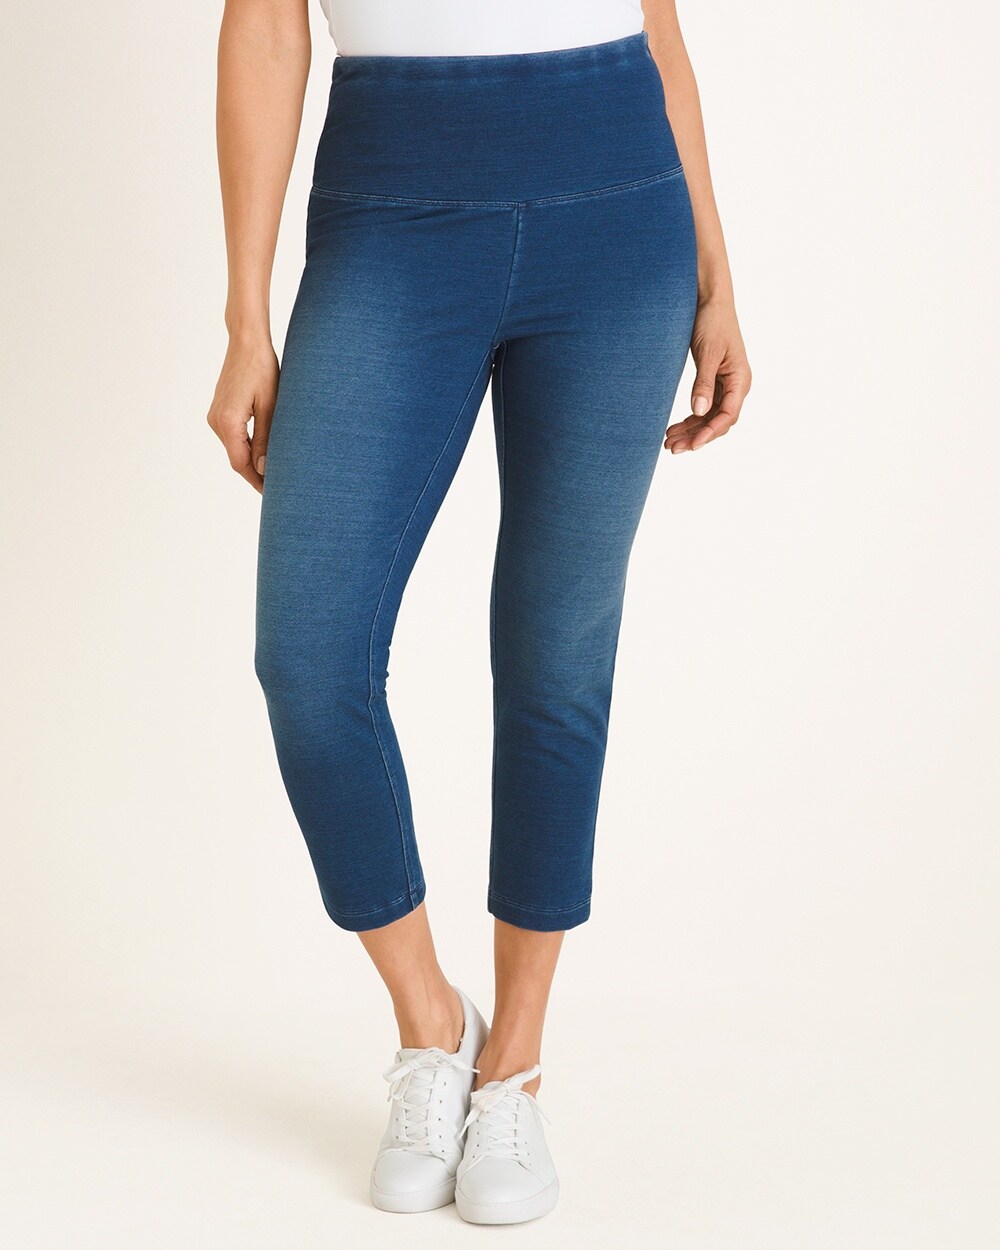  My Fit Jeans- SIZE 2-12 DARK WASH: Women's Stretch Denim Jeans  with Pockets and the Comfort of Leggings, Petite through Plus Size :  Clothing, Shoes & Jewelry